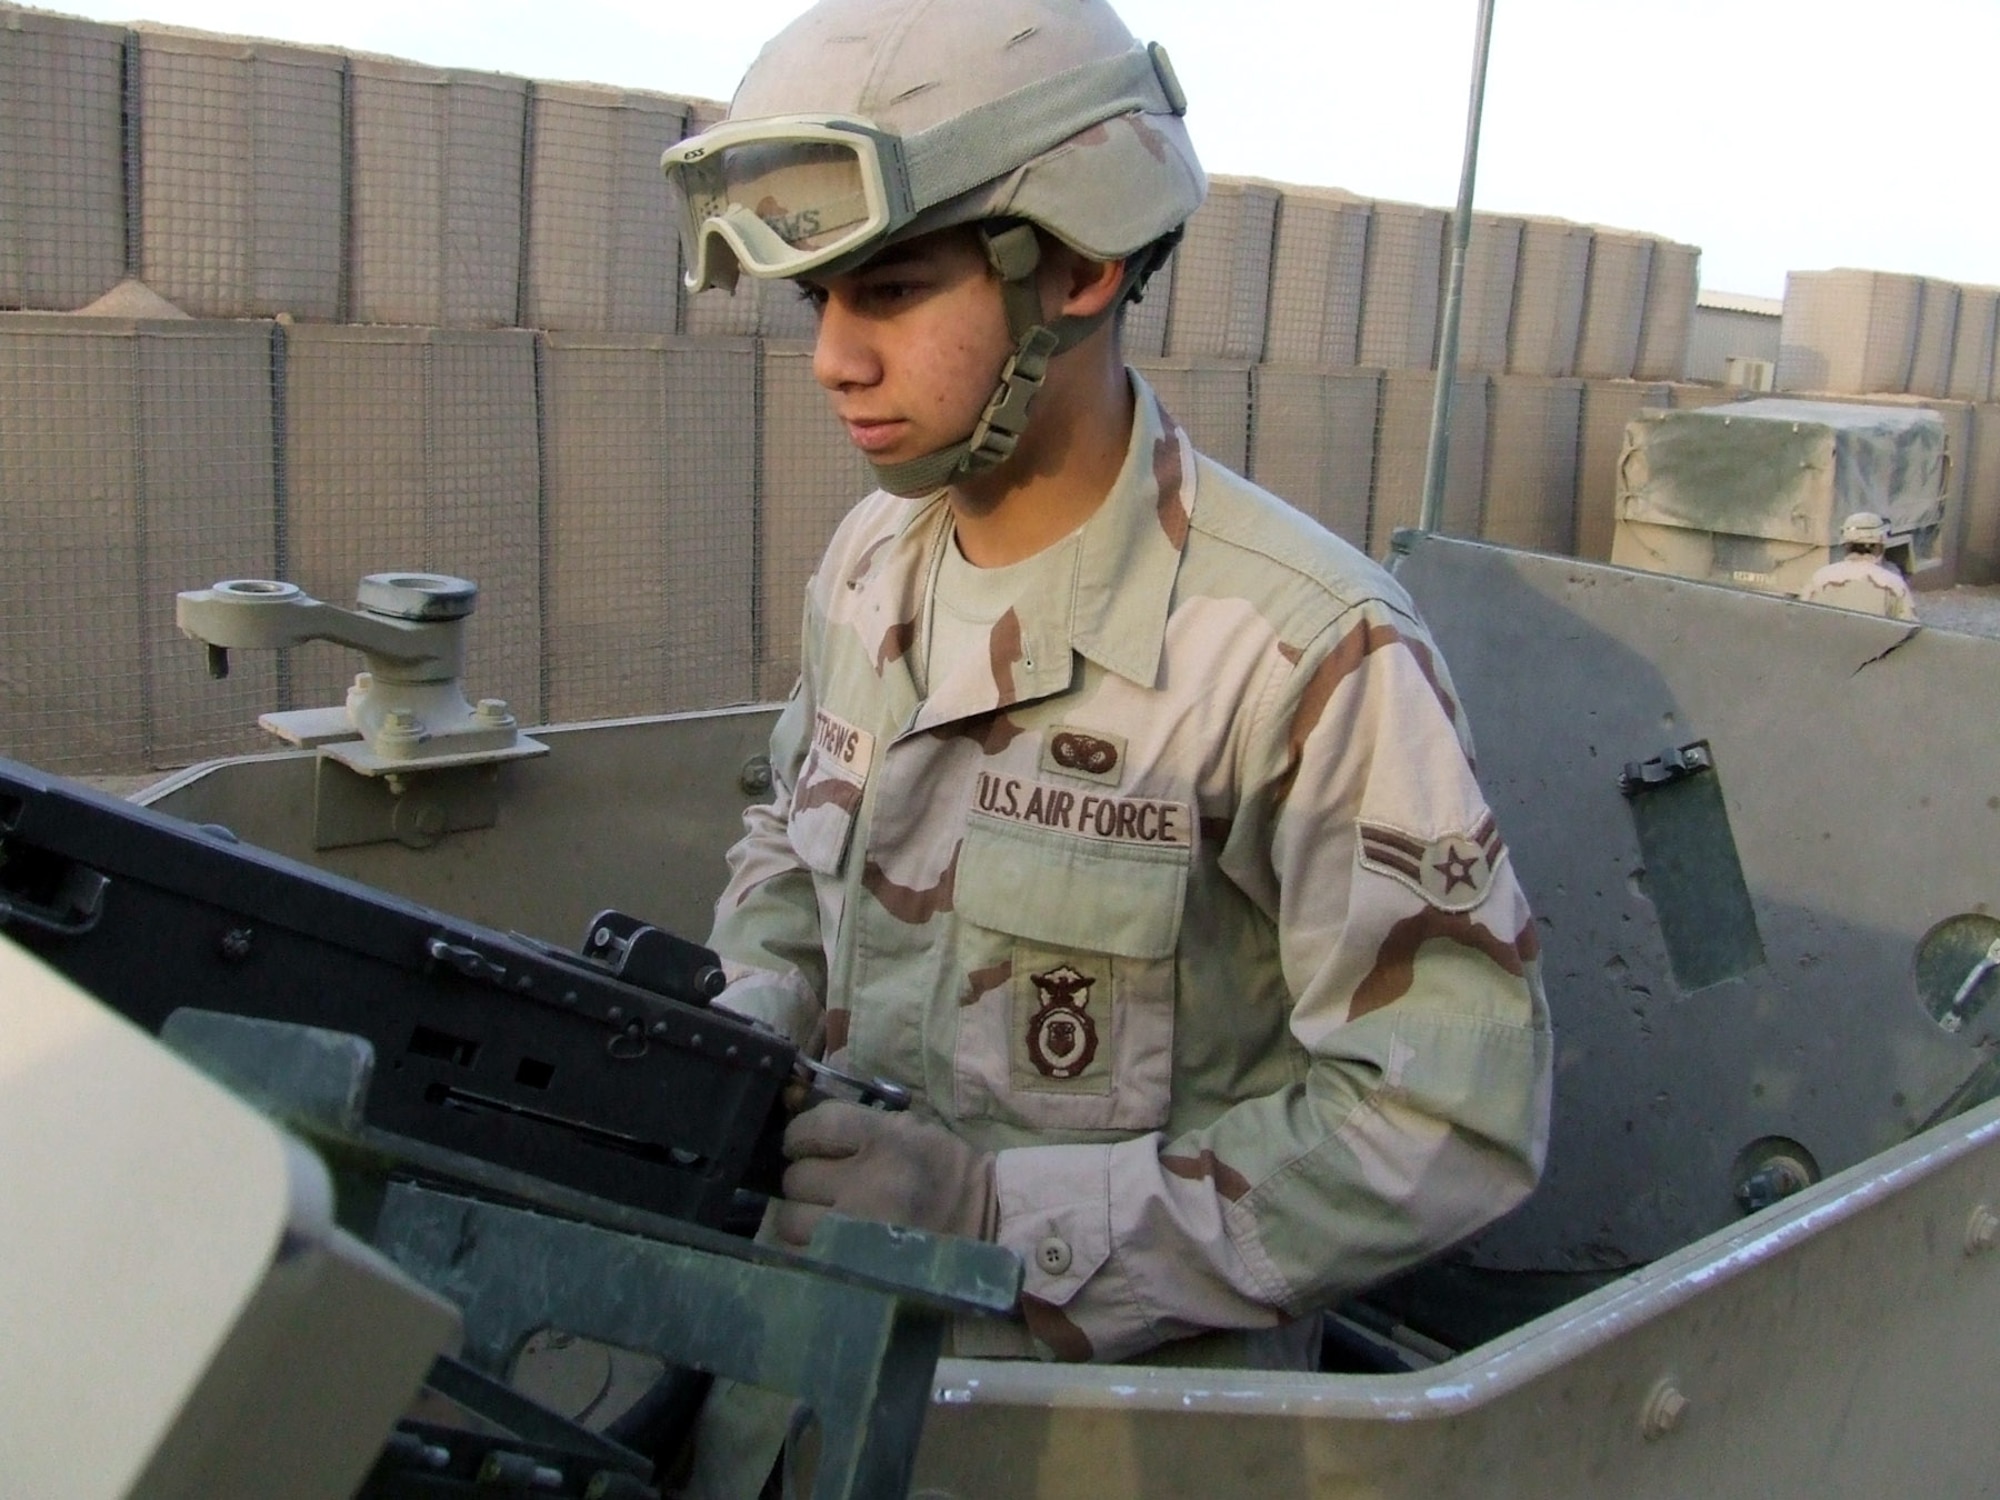 Airman 1st Class James Matthews checks his .50 caliber machine gun prior to convoy departure from Contingency Operating Base Speicher, Iraq. Deployed from the 96th Security Forces Squadron at Eglin Air Force Base, Fla., Airman Matthews is assigned to the 732nd Expeditionary Security Forces Squadron's Detachment 6. The detachment sends convoys out daily to assess the capability of Iraqi police stations in the Salah ad Din province. (U.S. Air Force photo/Maj. Richard C. Sater) 
